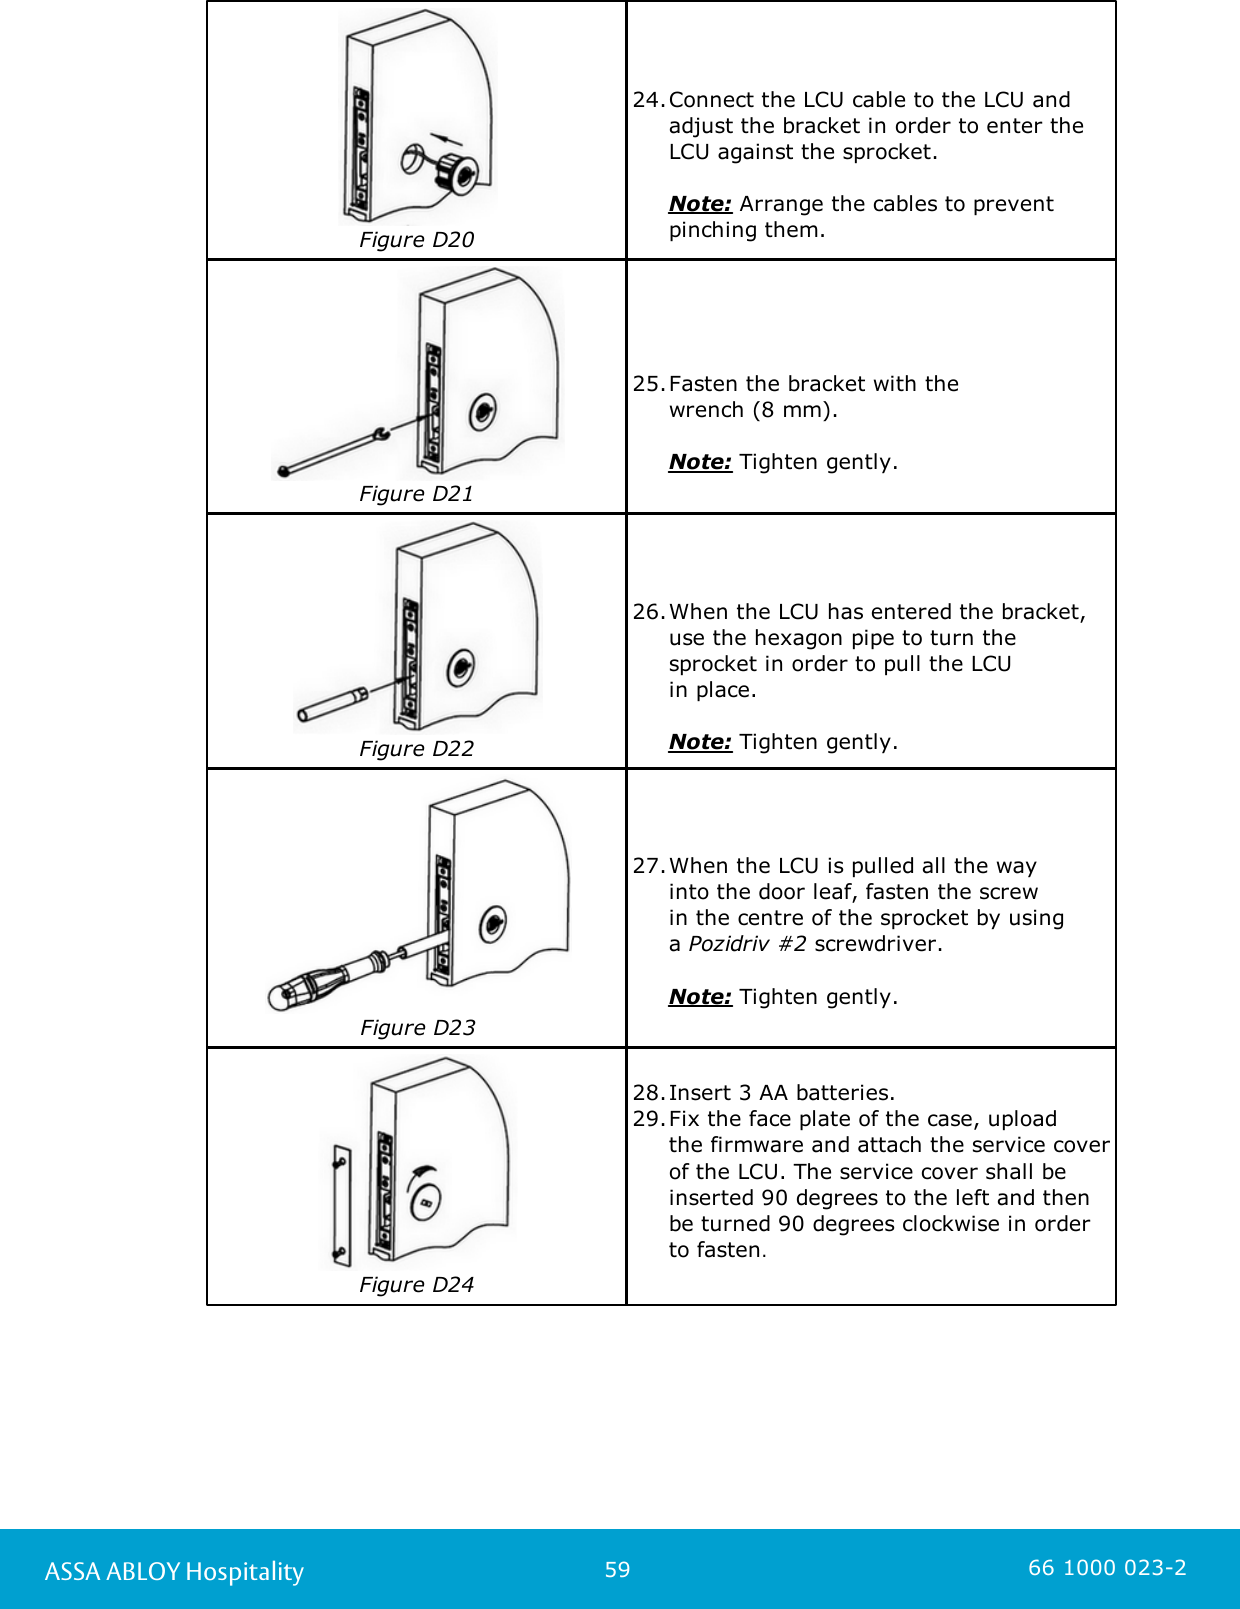 59ASSA ABLOY Hospitality 66 1000 023-2Figure D2024.Connect the LCU cable to the LCU andadjust the bracket in order to enter theLCU against the sprocket.      Note: Arrange the cables to preventpinching them.Figure D2125.Fasten the bracket with the wrench (8 mm).      Note: Tighten gently.Figure D2226.When the LCU has entered the bracket,use the hexagon pipe to turn thesprocket in order to pull the LCU in place.      Note: Tighten gently.Figure D2327.When the LCU is pulled all the way into the door leaf, fasten the screw in the centre of the sprocket by using a Pozidriv #2 screwdriver.      Note: Tighten gently.Figure D2428.Insert 3 AA batteries. 29.Fix the face plate of the case, upload the firmware and attach the service coverof the LCU. The service cover shall beinserted 90 degrees to the left and thenbe turned 90 degrees clockwise in orderto fasten. 